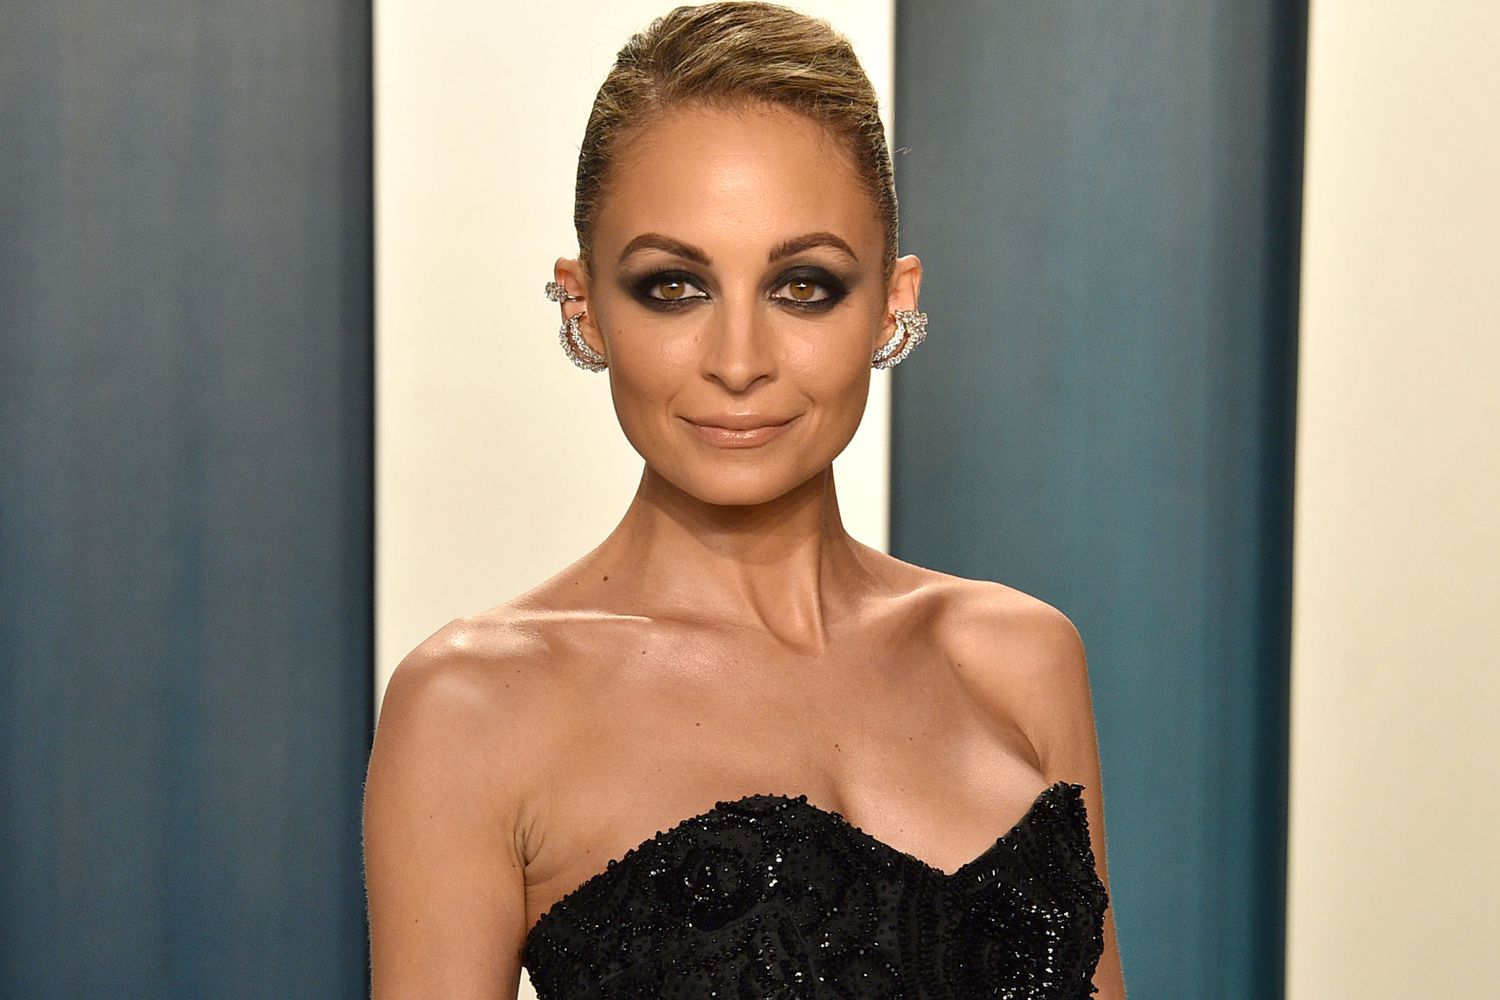 Nicole Richie Wears Glam Gold Gown for Solo Holiday Photo: 'My Family Forgot... But I Didn't'